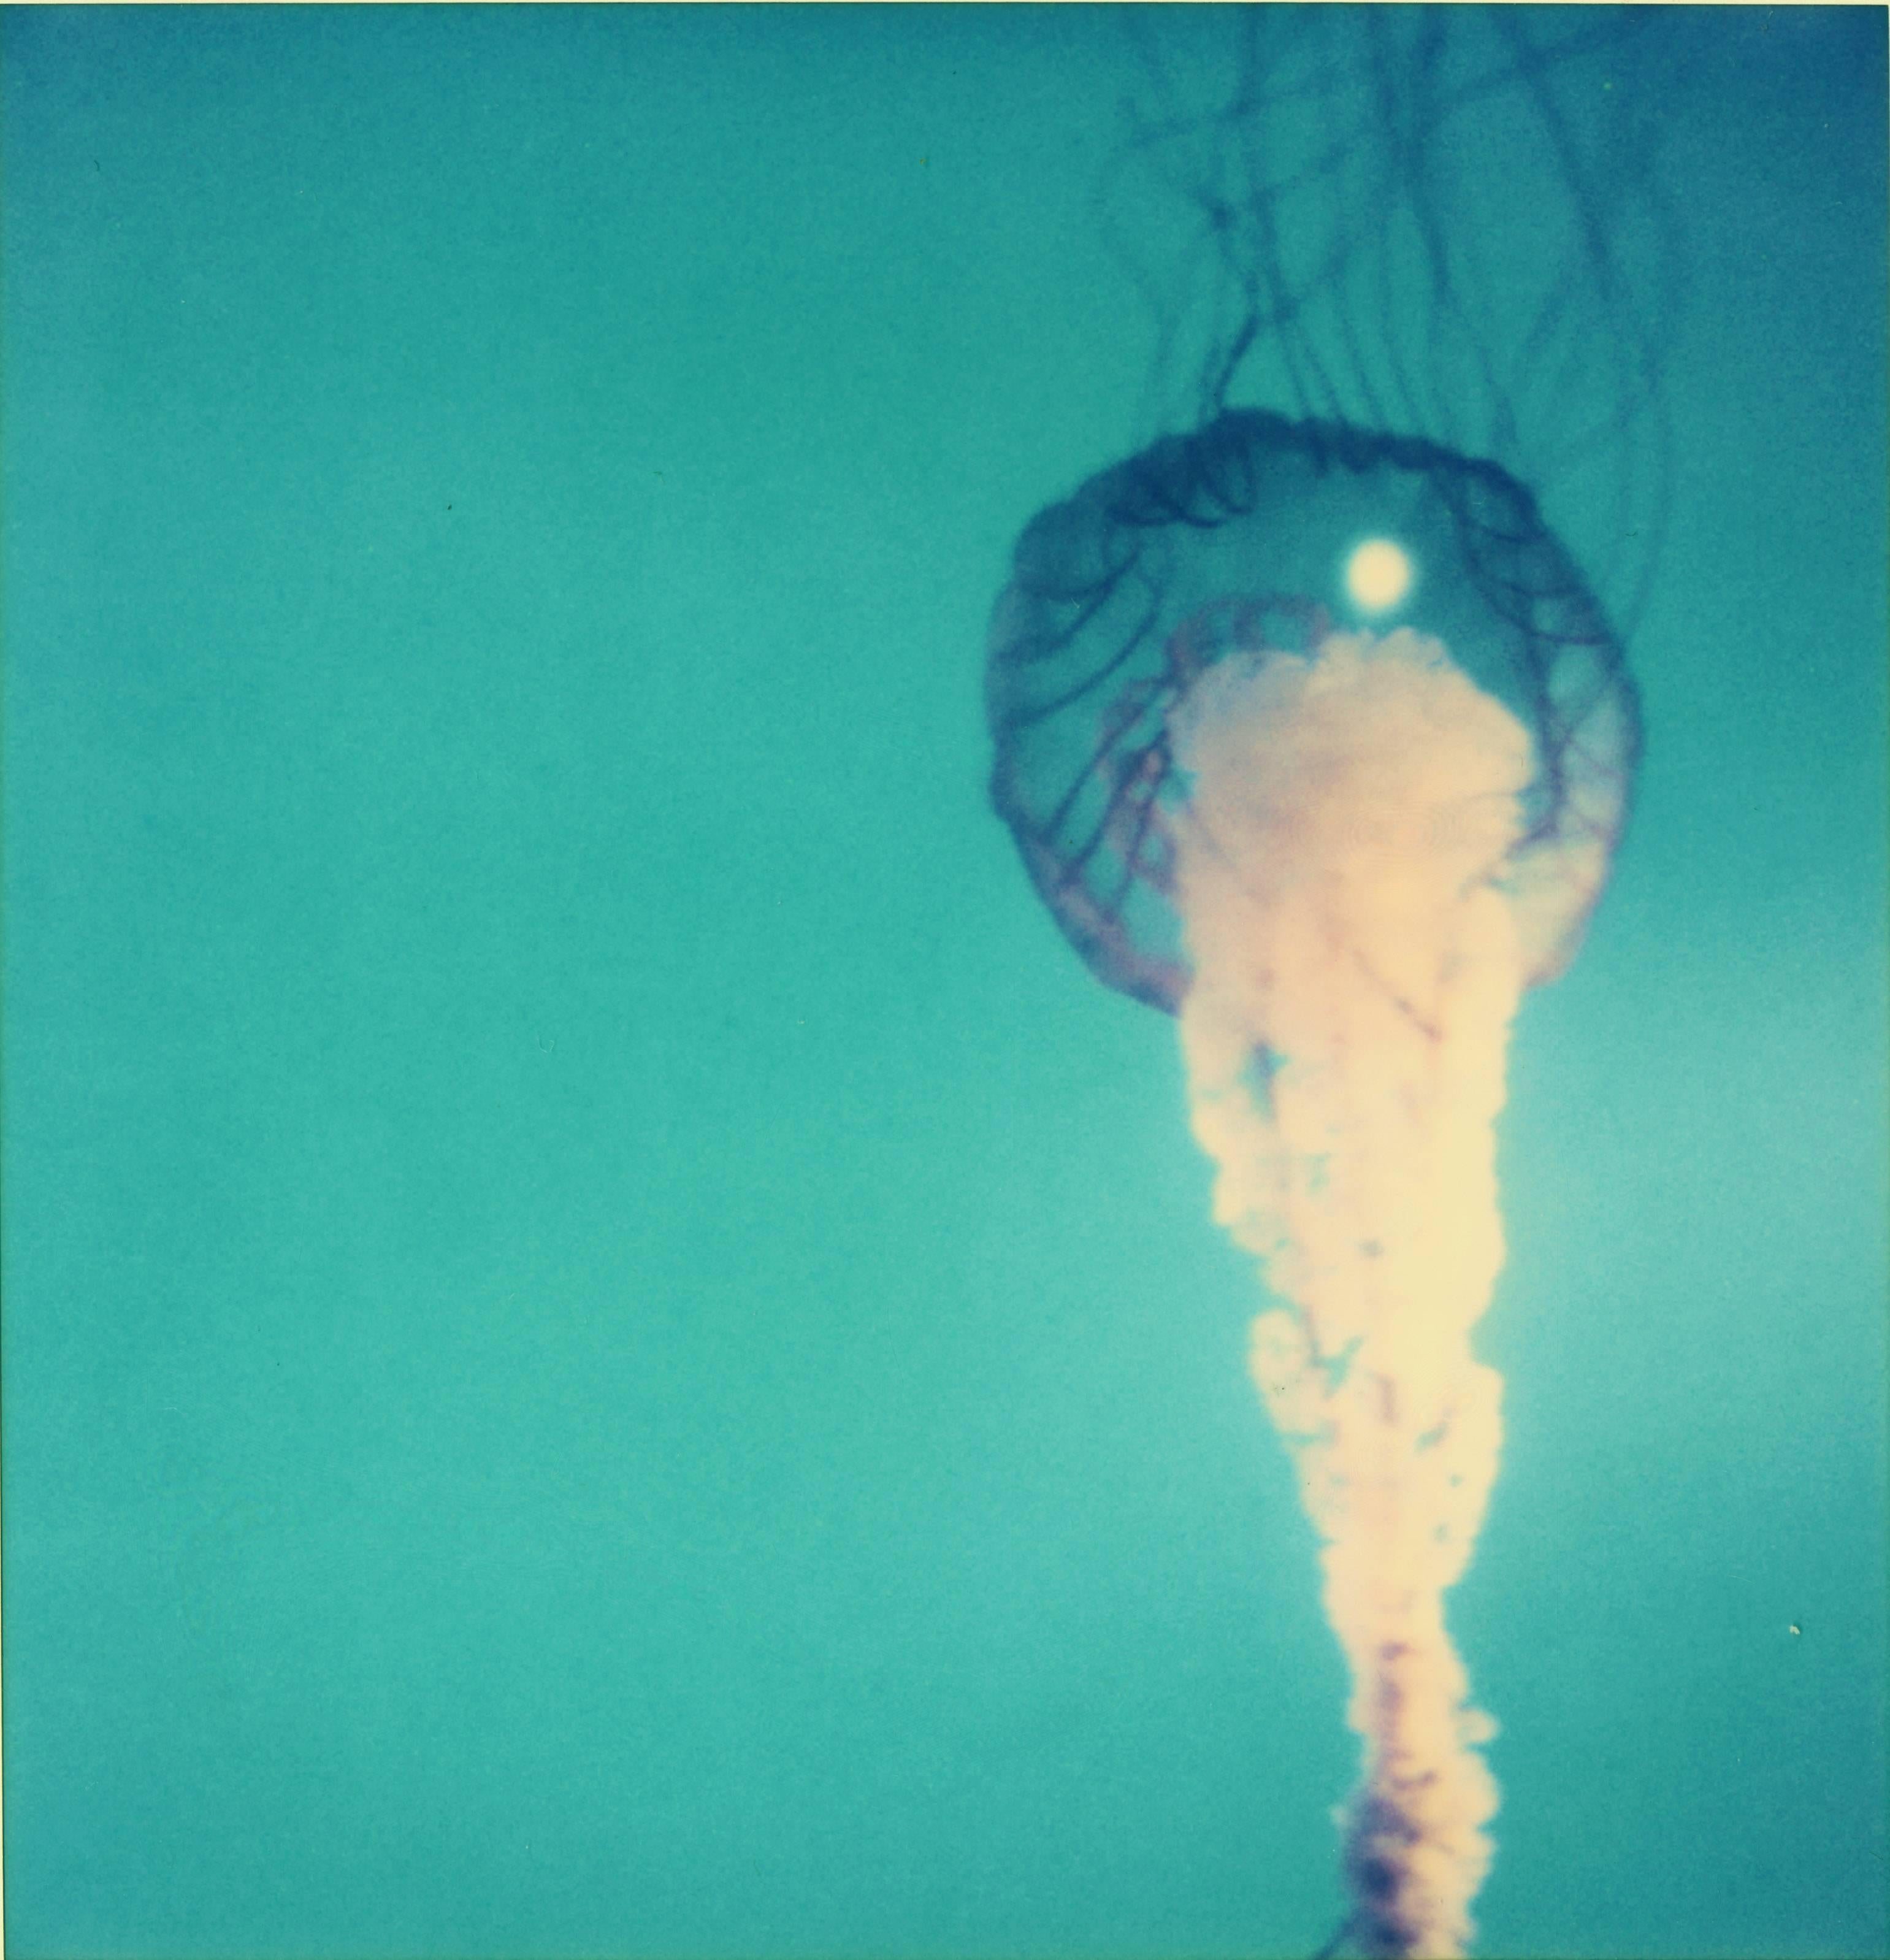 Stefanie Schneider Still-Life Photograph - Jelly Fish from the movie Stay based on a Polaroid